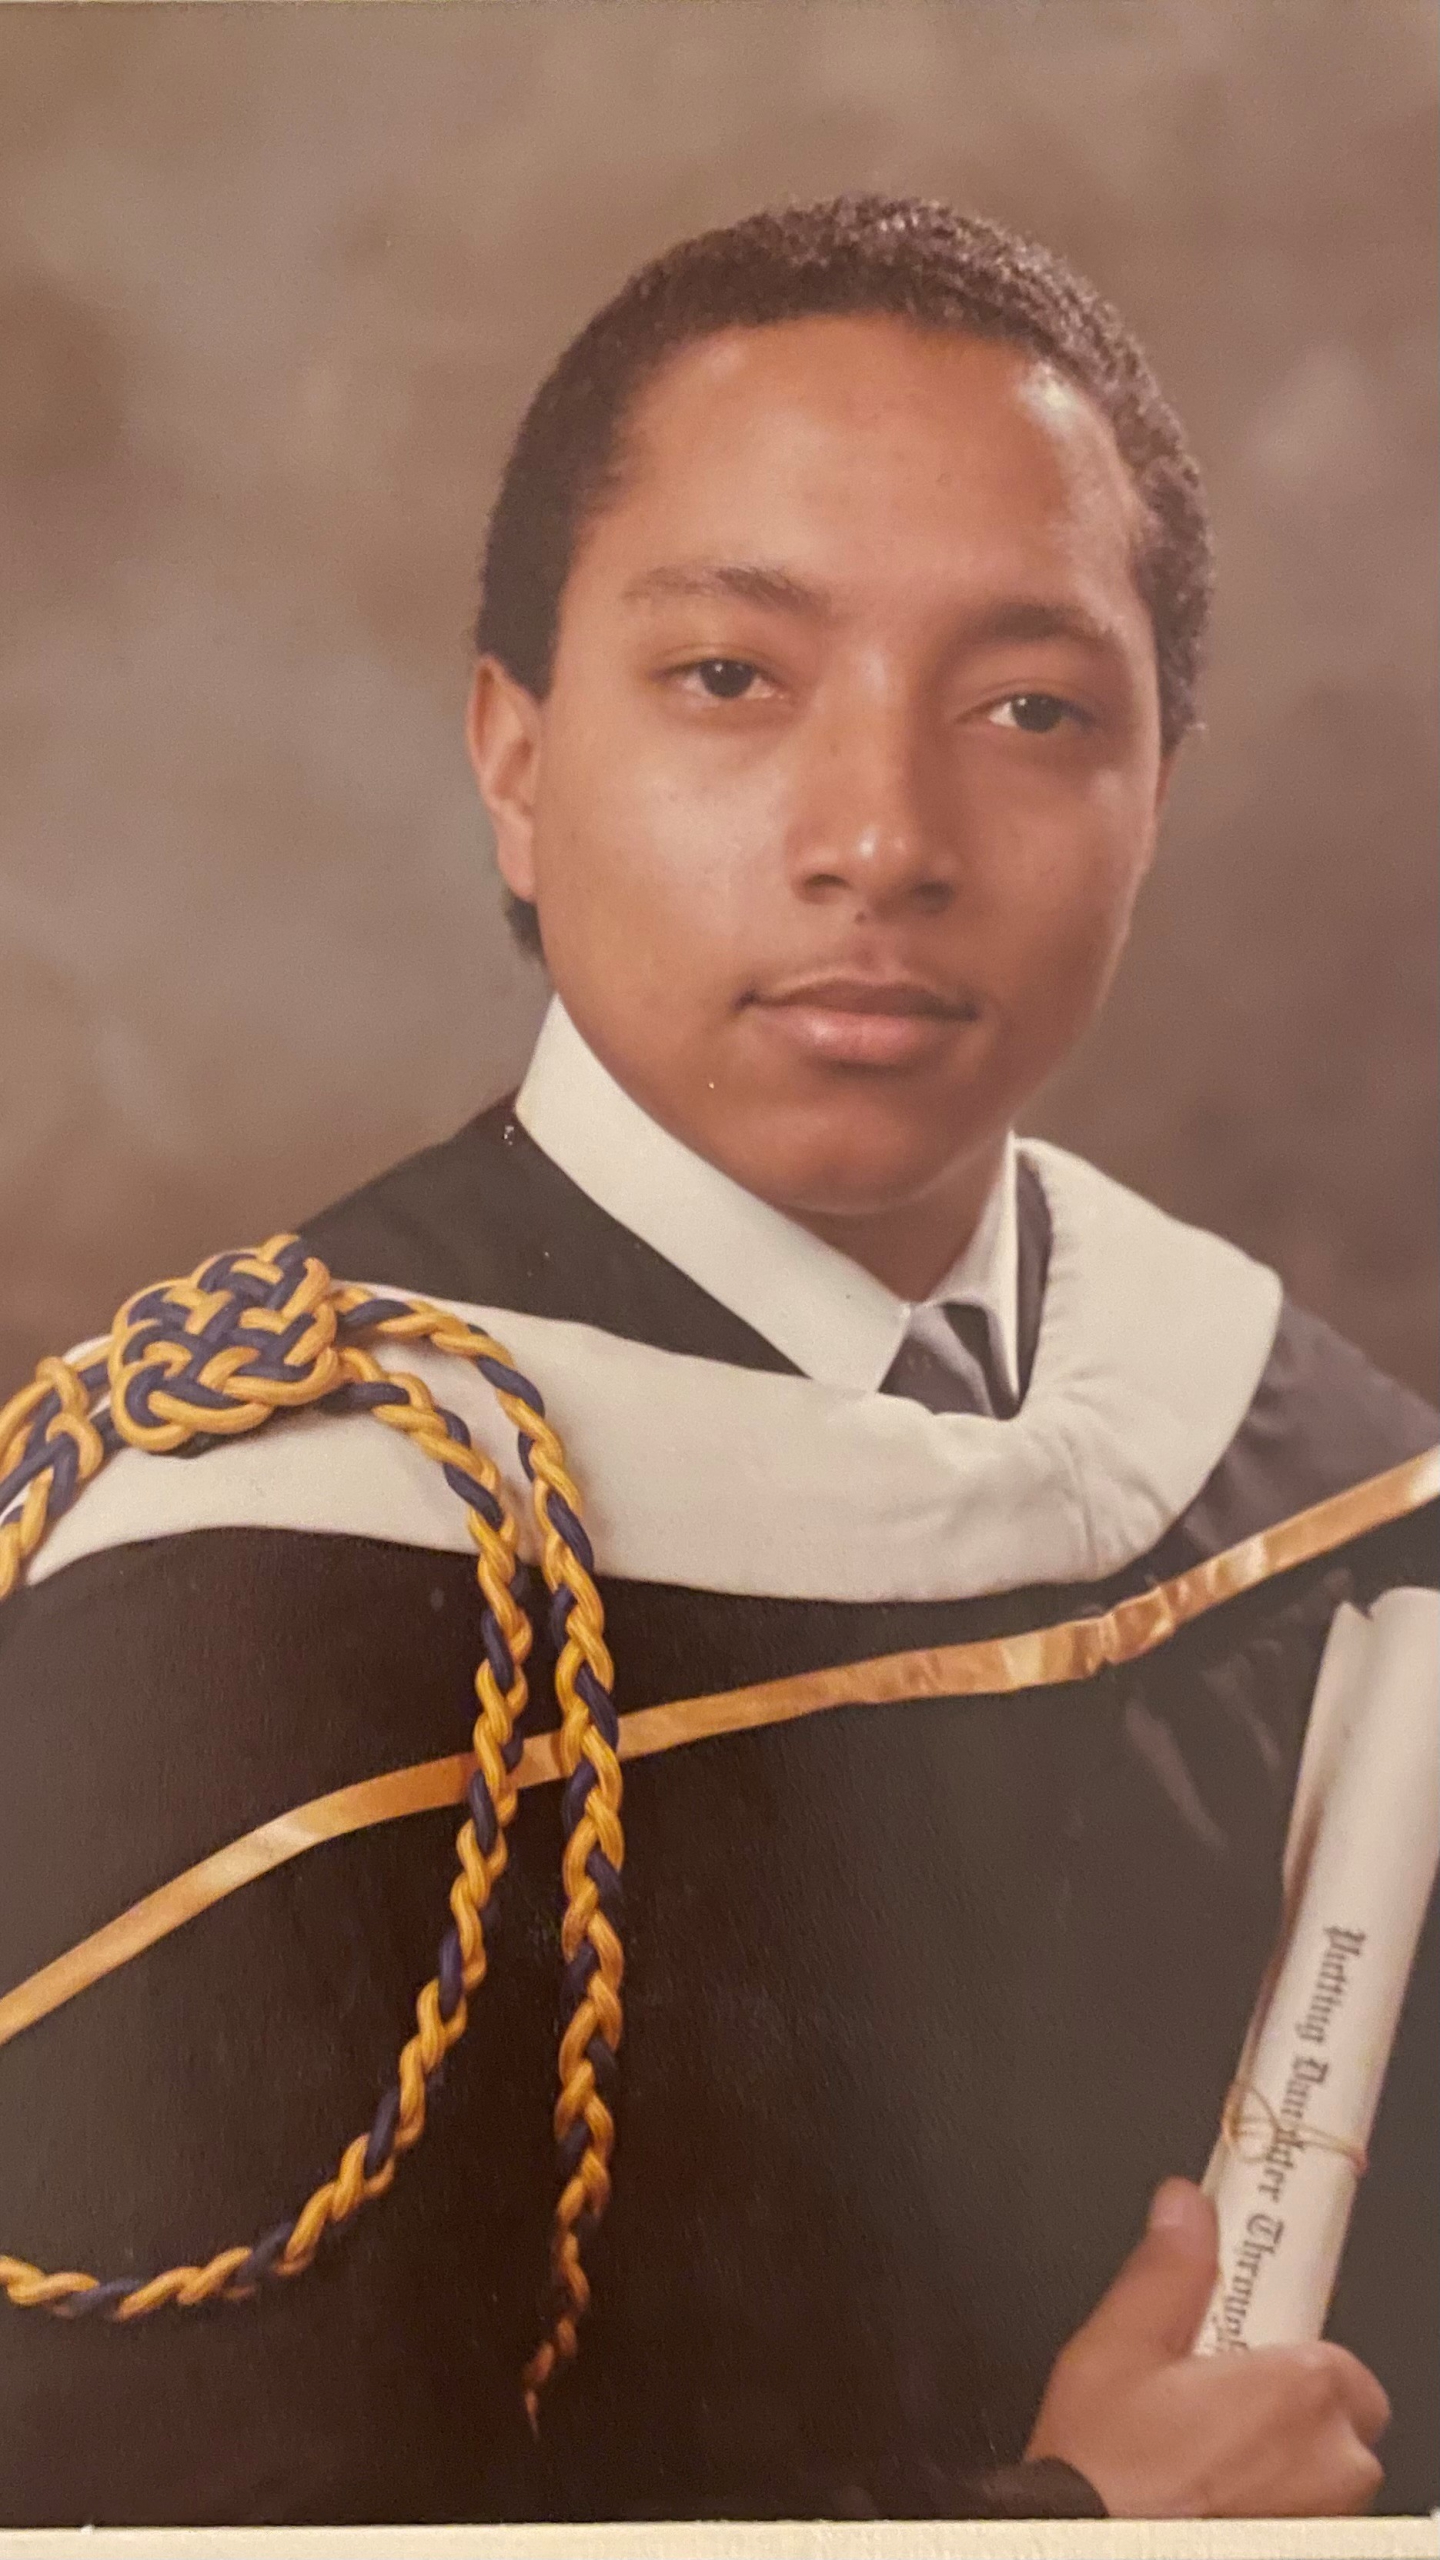 A photograph of Brett York wearing graduation regalia holding a diploma with a blue and yellow graduation cord hanging from one of his shoulders.